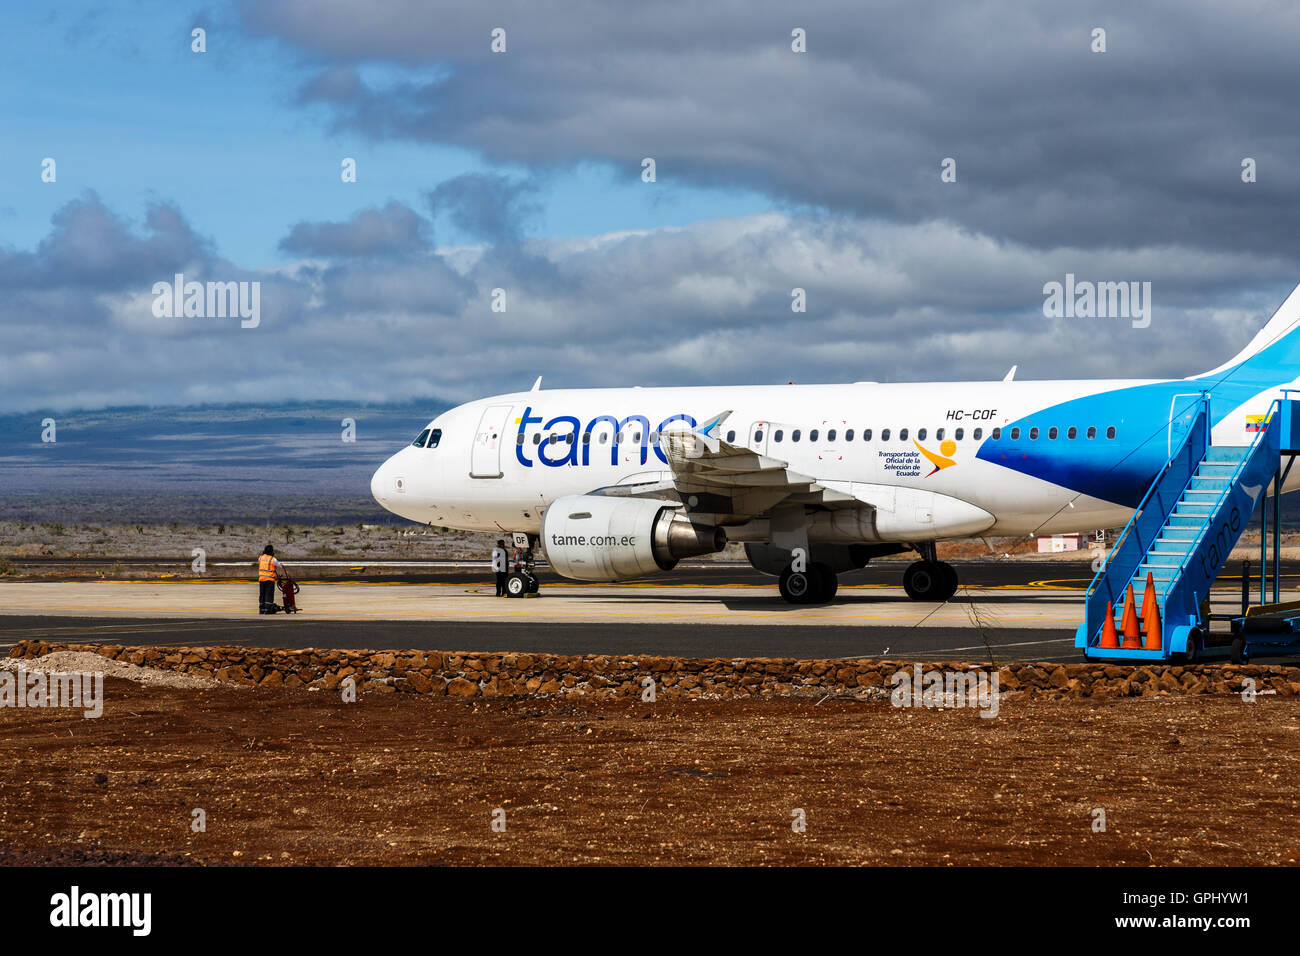 TAME airline A320 Airbus aeroplane on the runway at Baltra, Galapagos Islands, Ecuador, South America Stock Photo